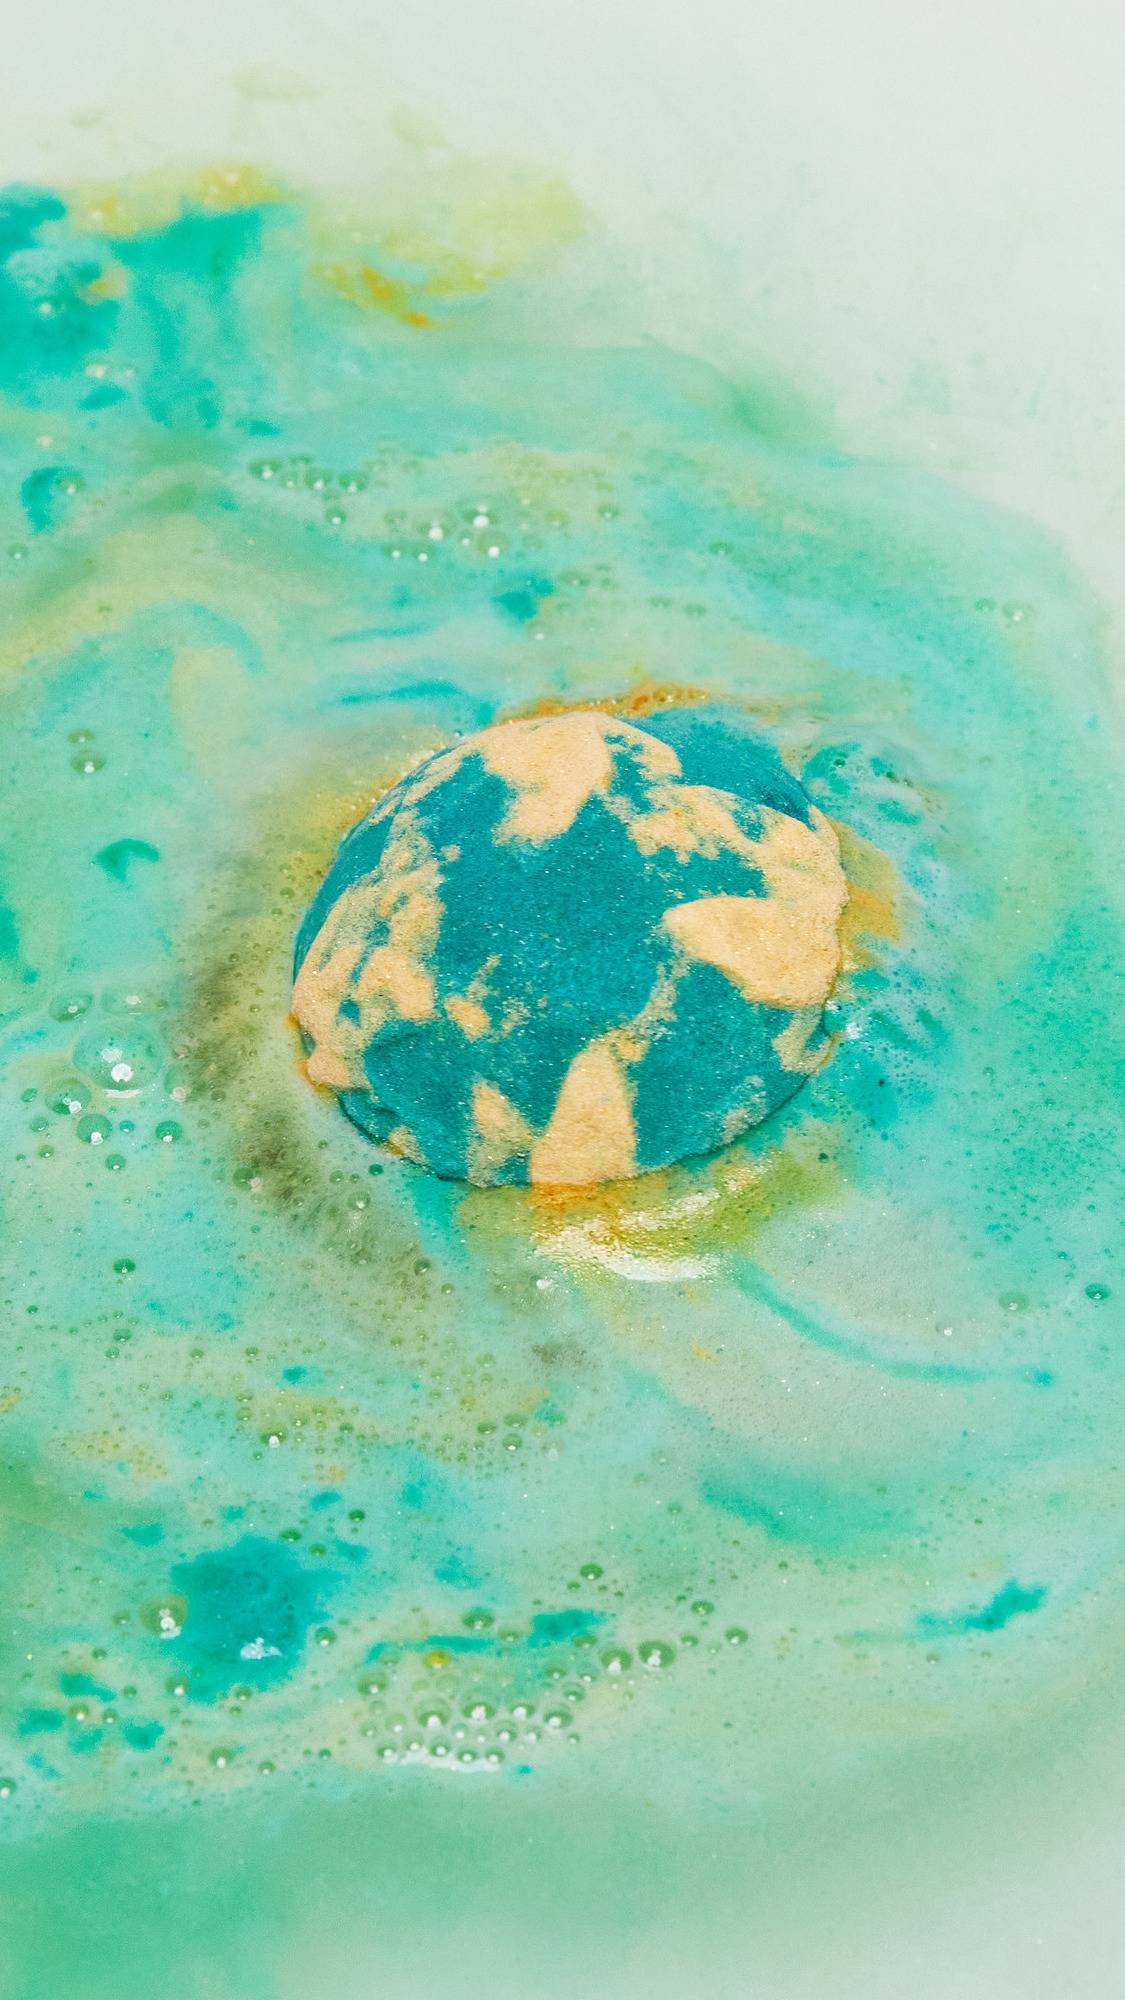 The Druid of Bath bath bomb has just been placed on the bath water as it pushes out a deep green foam with flecks of golden swirls throughout. 